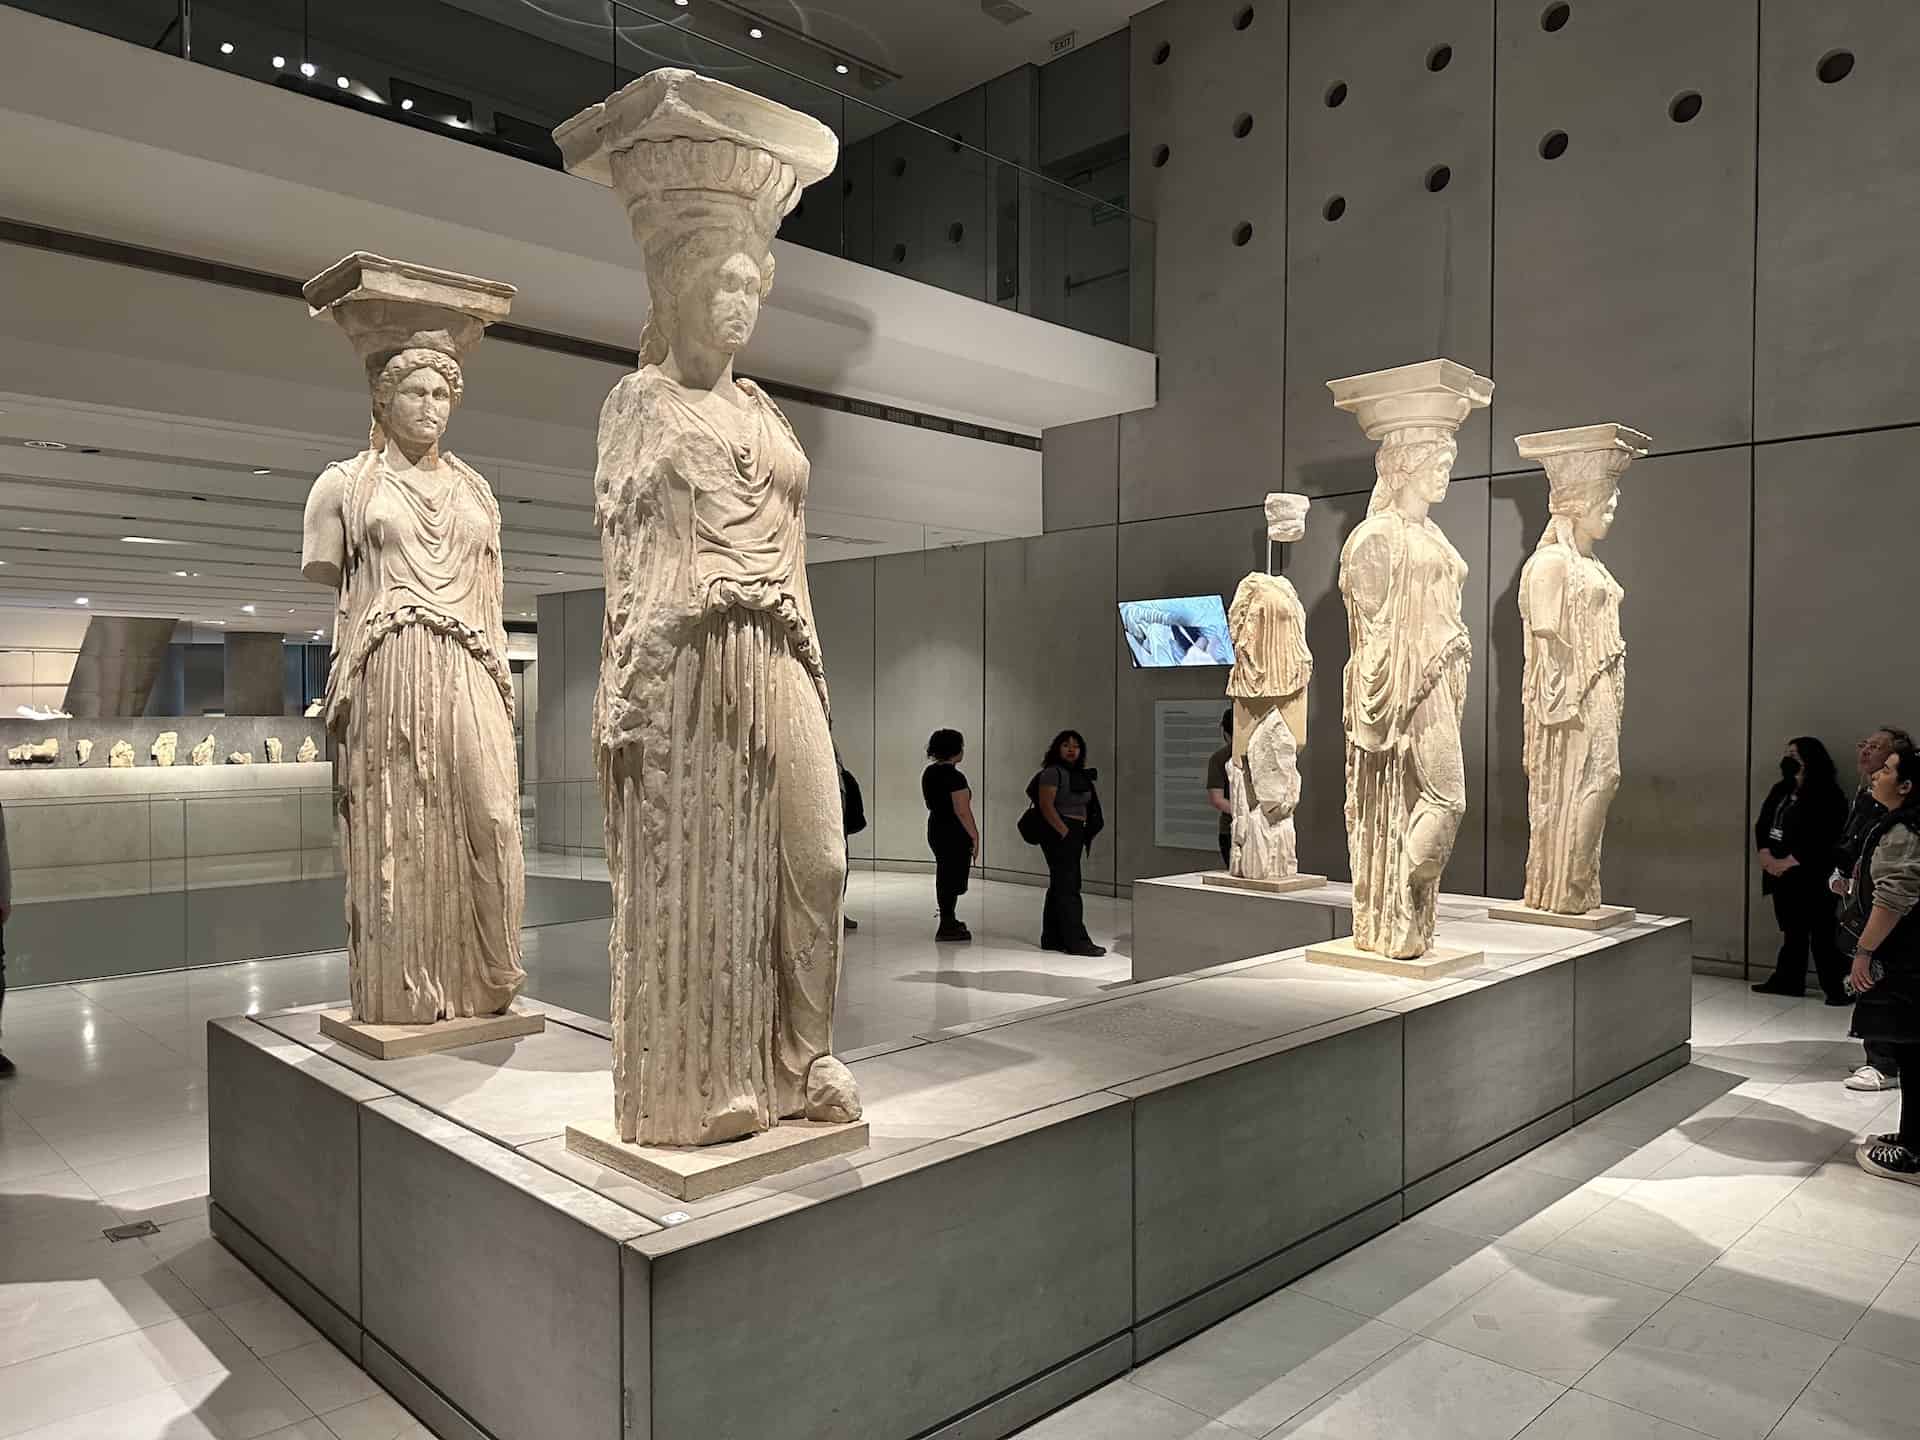 Caryatids at the Acropolis Museum in Athens, Greece